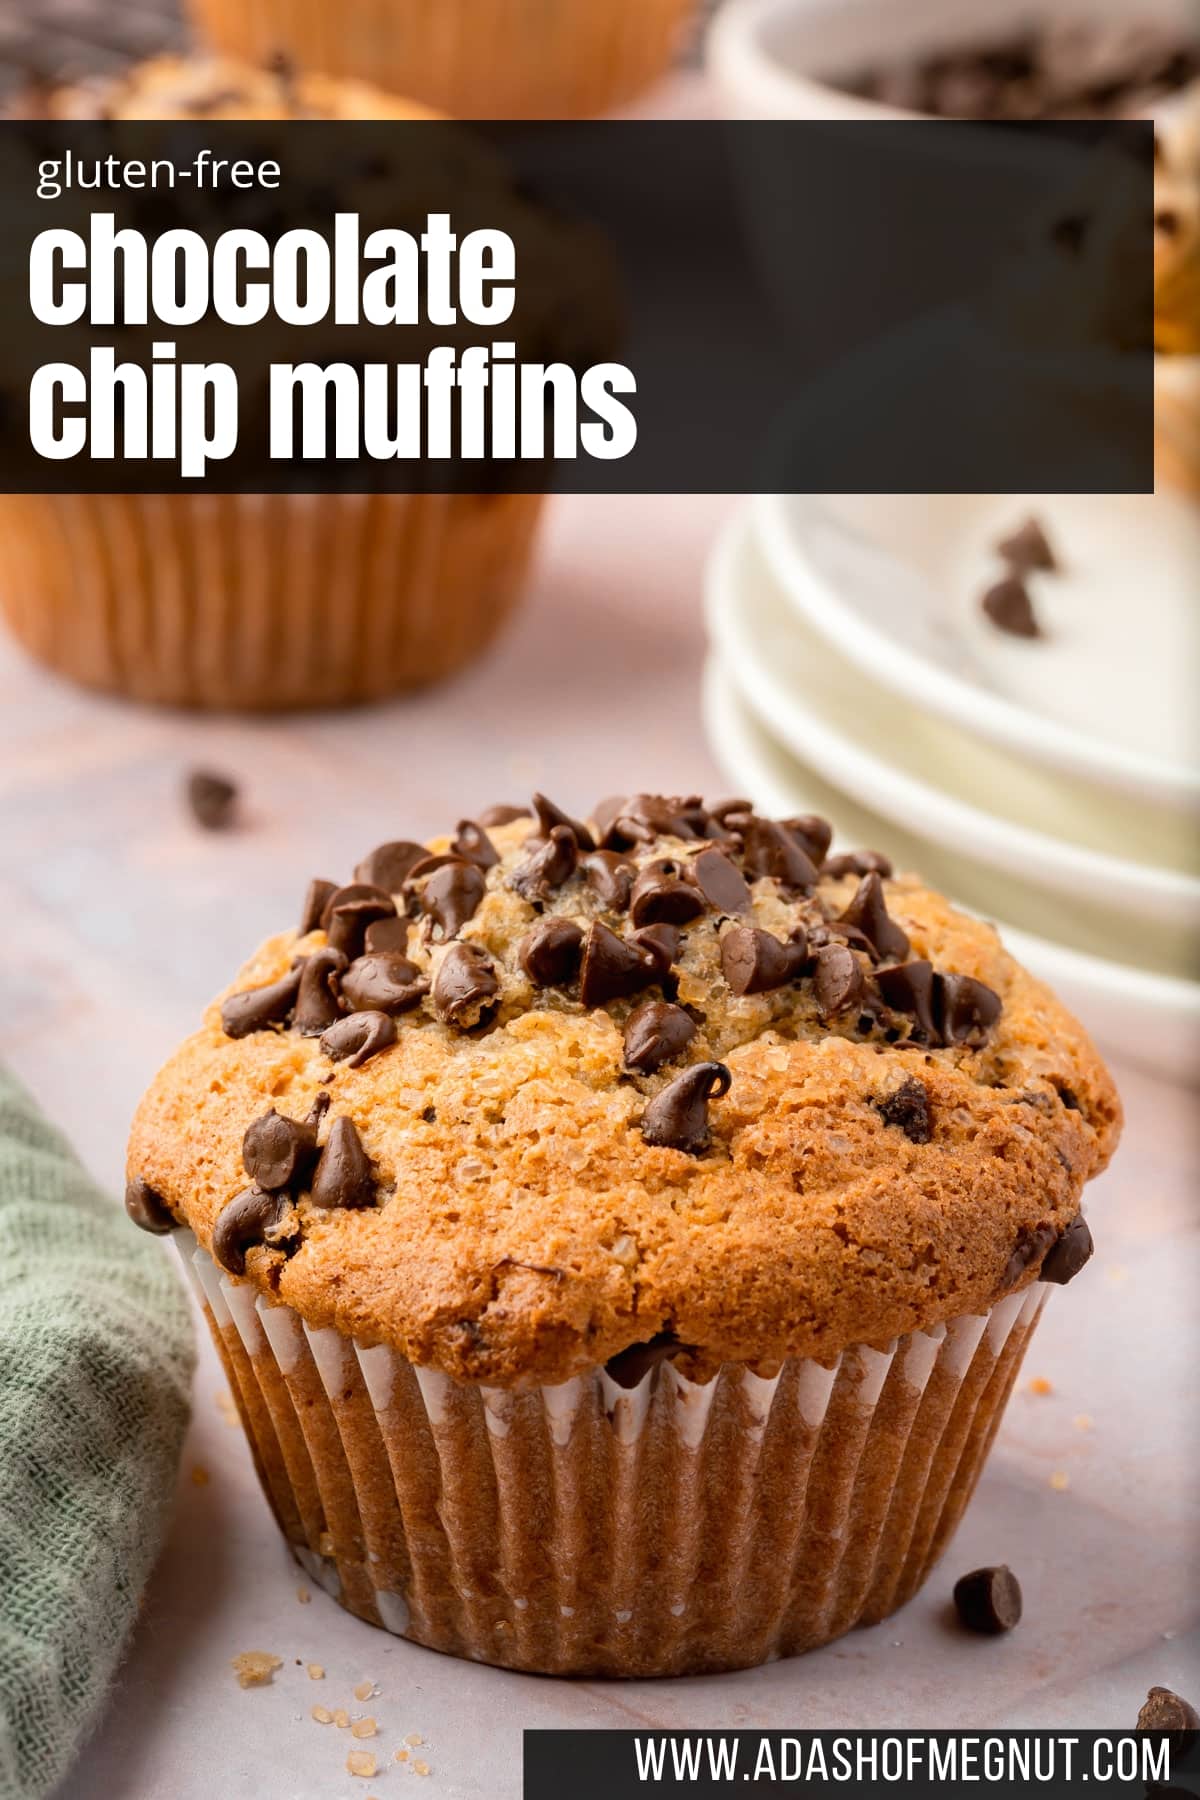 A single gluten-free mini chocolate chip muffin with a stack of mini dessert plates behind it.